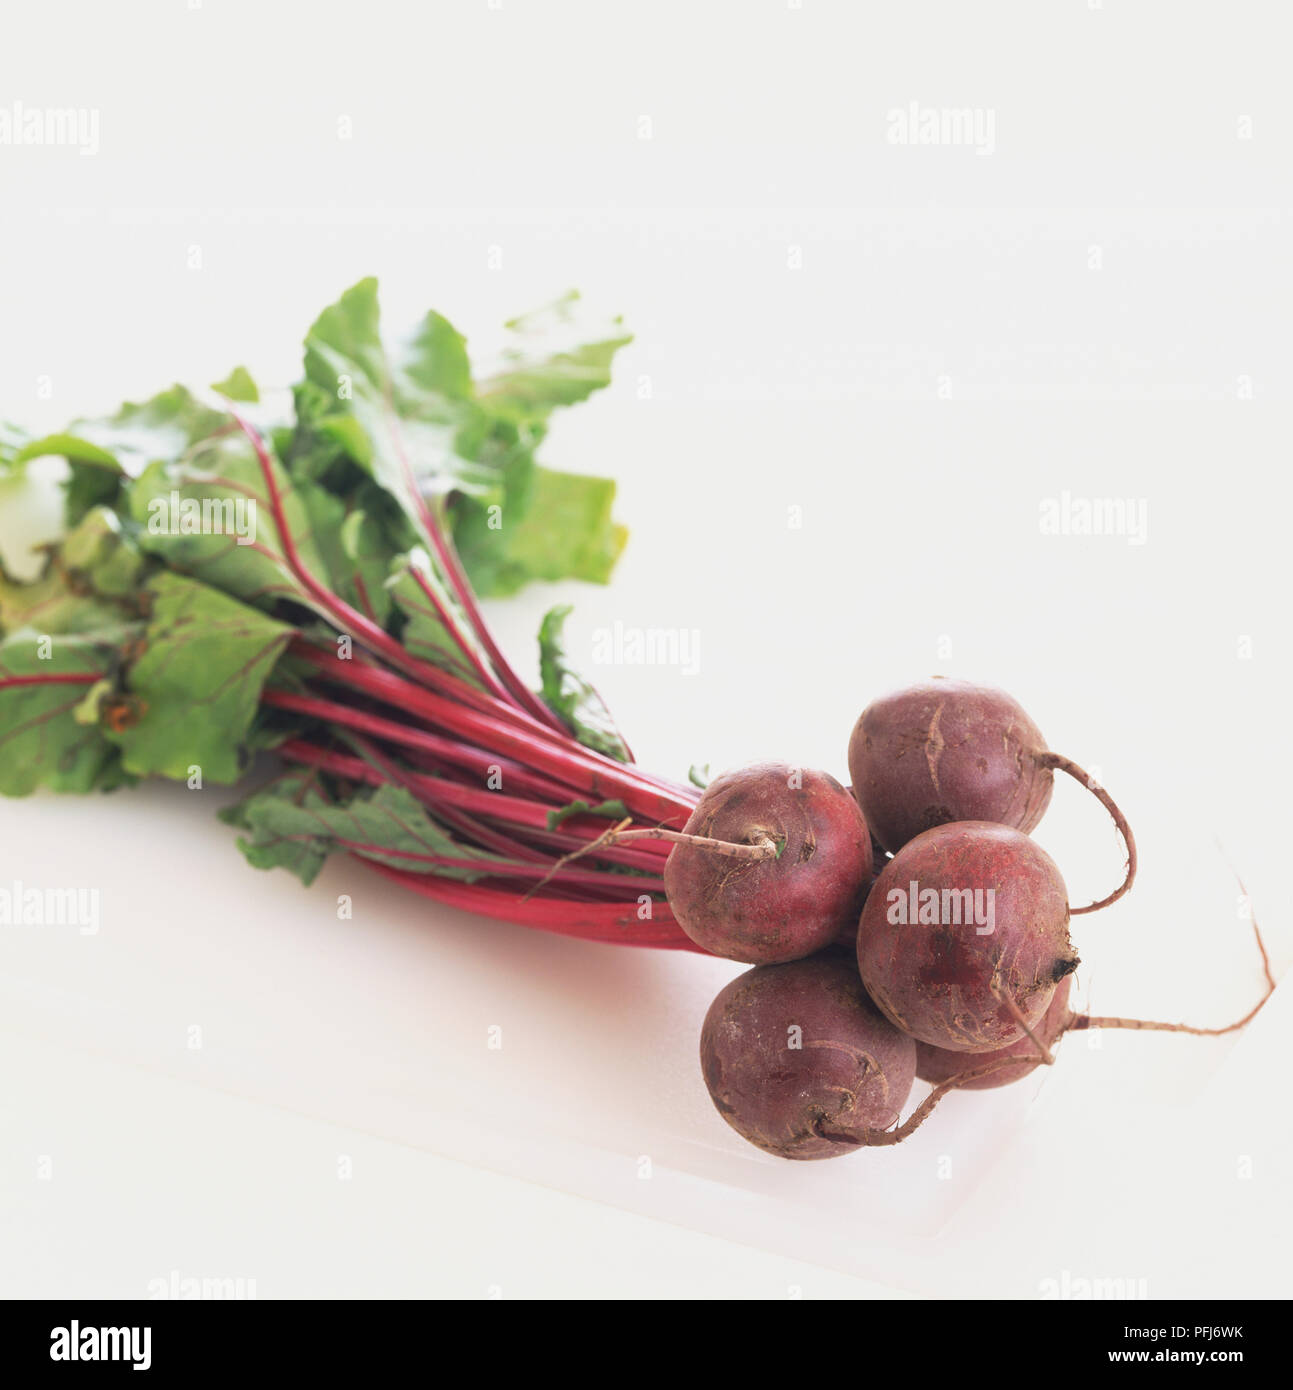 Beetroots attached to shoots, close up. Stock Photo